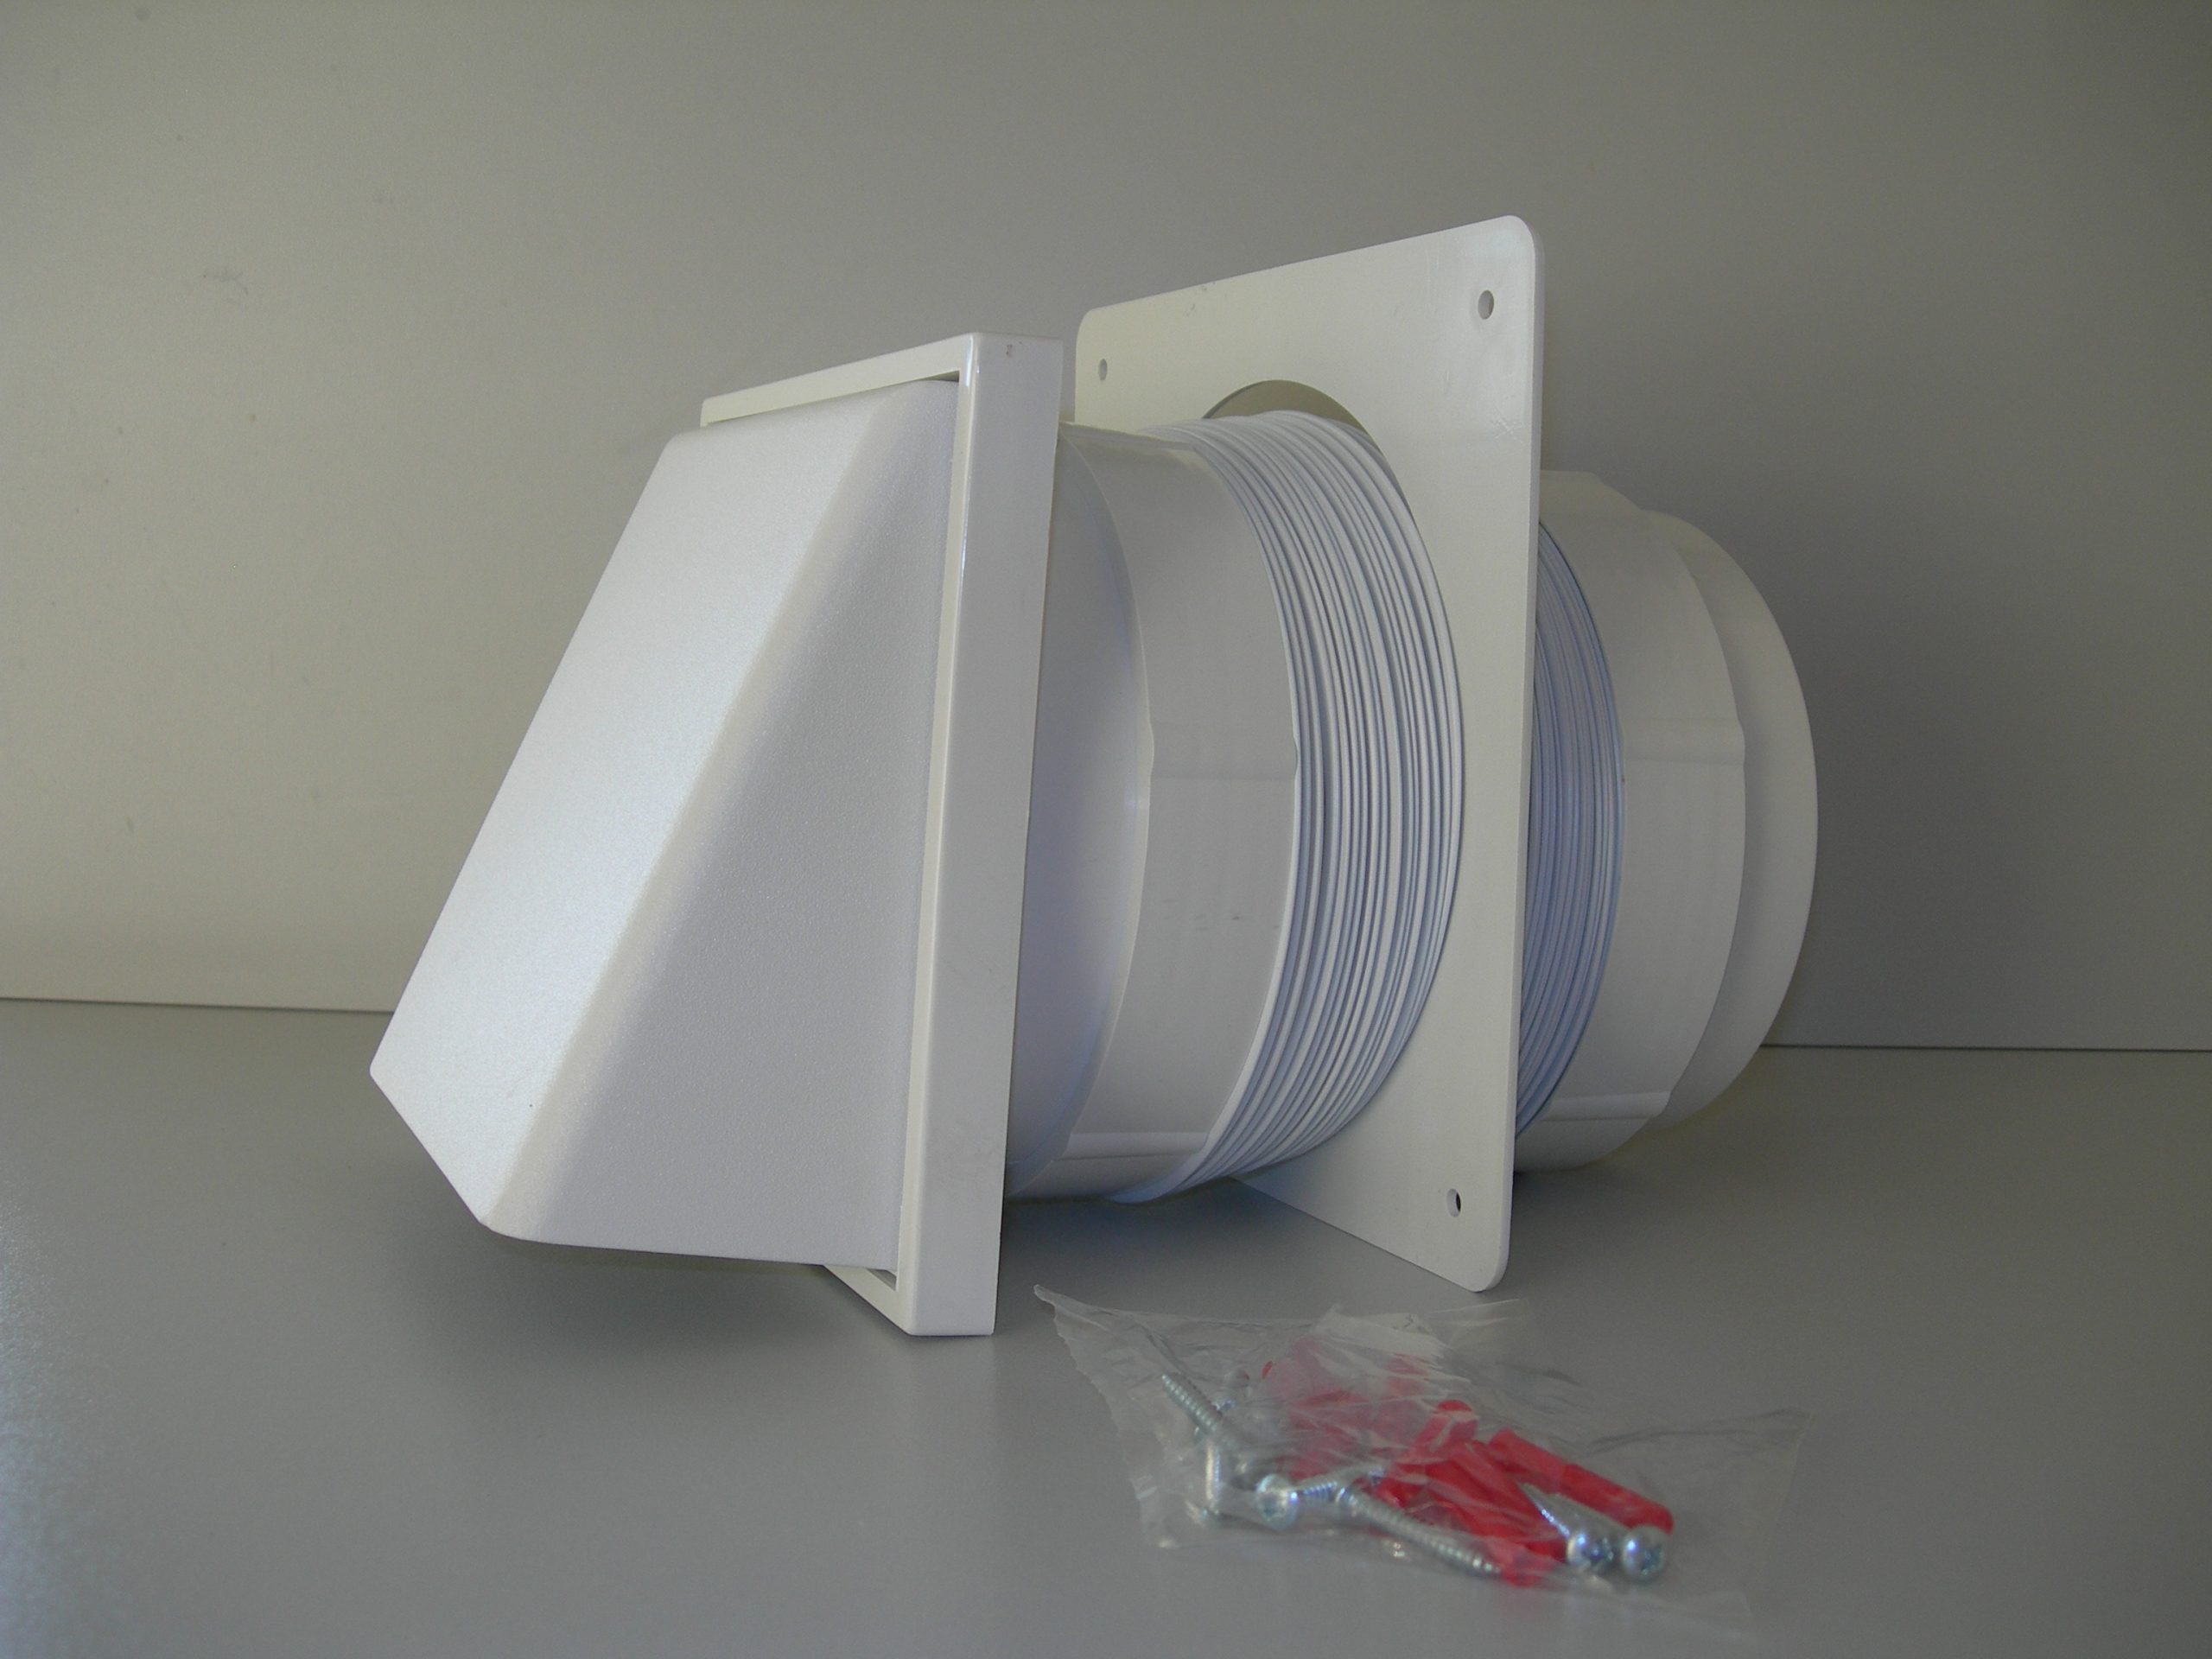 Details About Manrose Cowled Wall Grille Ventilation Kit Extraction Fan Plastic Ducting 7202w pertaining to sizing 3072 X 2304